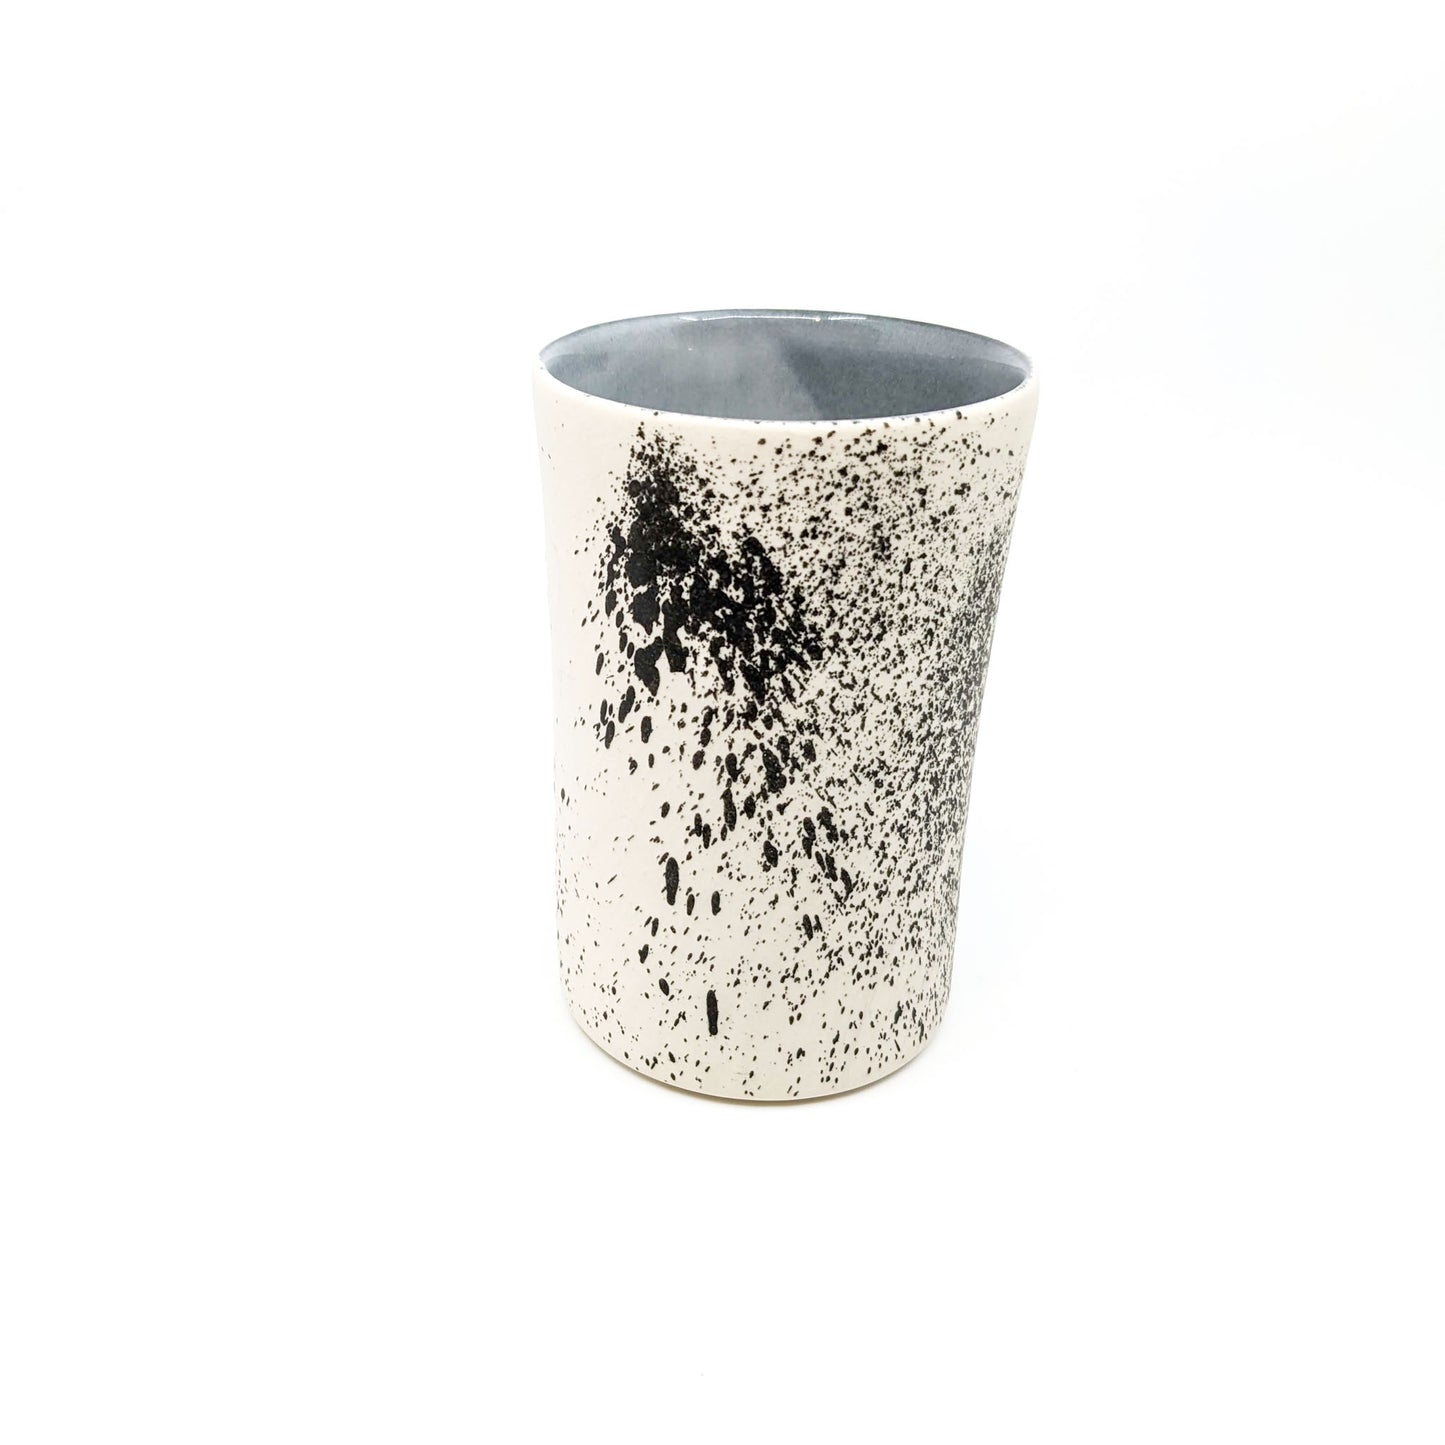 Tyler-James Anderson Tumbler at Visual Index art gallery.